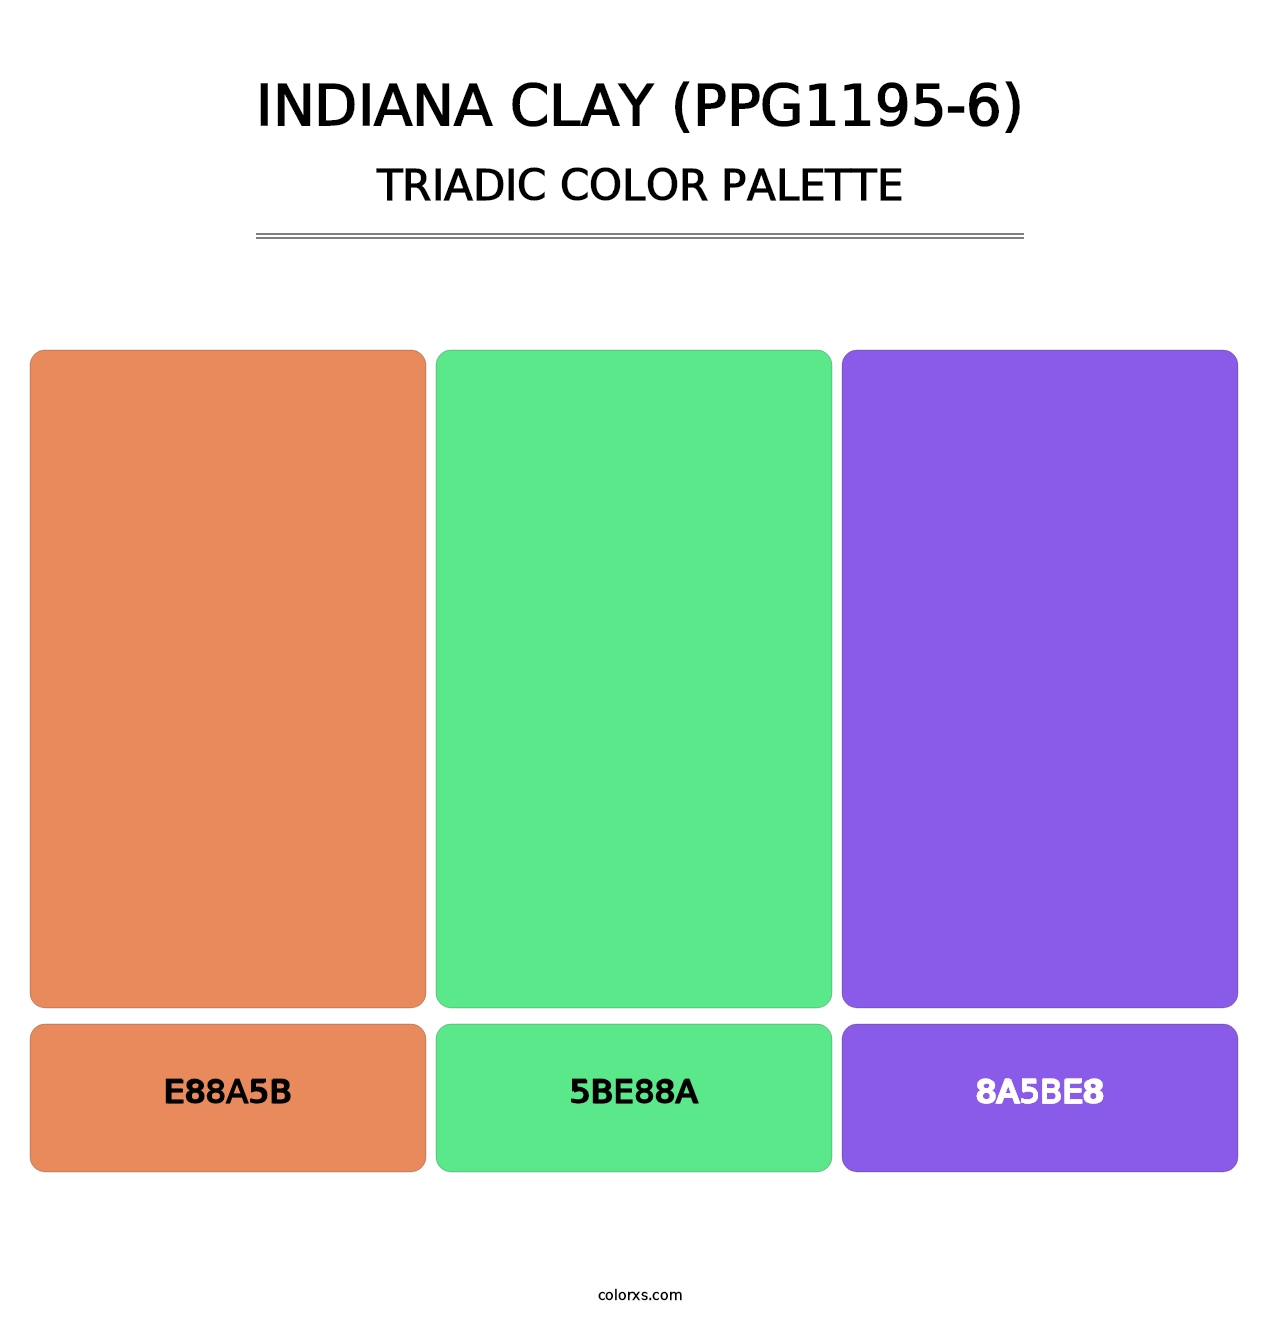 Indiana Clay (PPG1195-6) - Triadic Color Palette